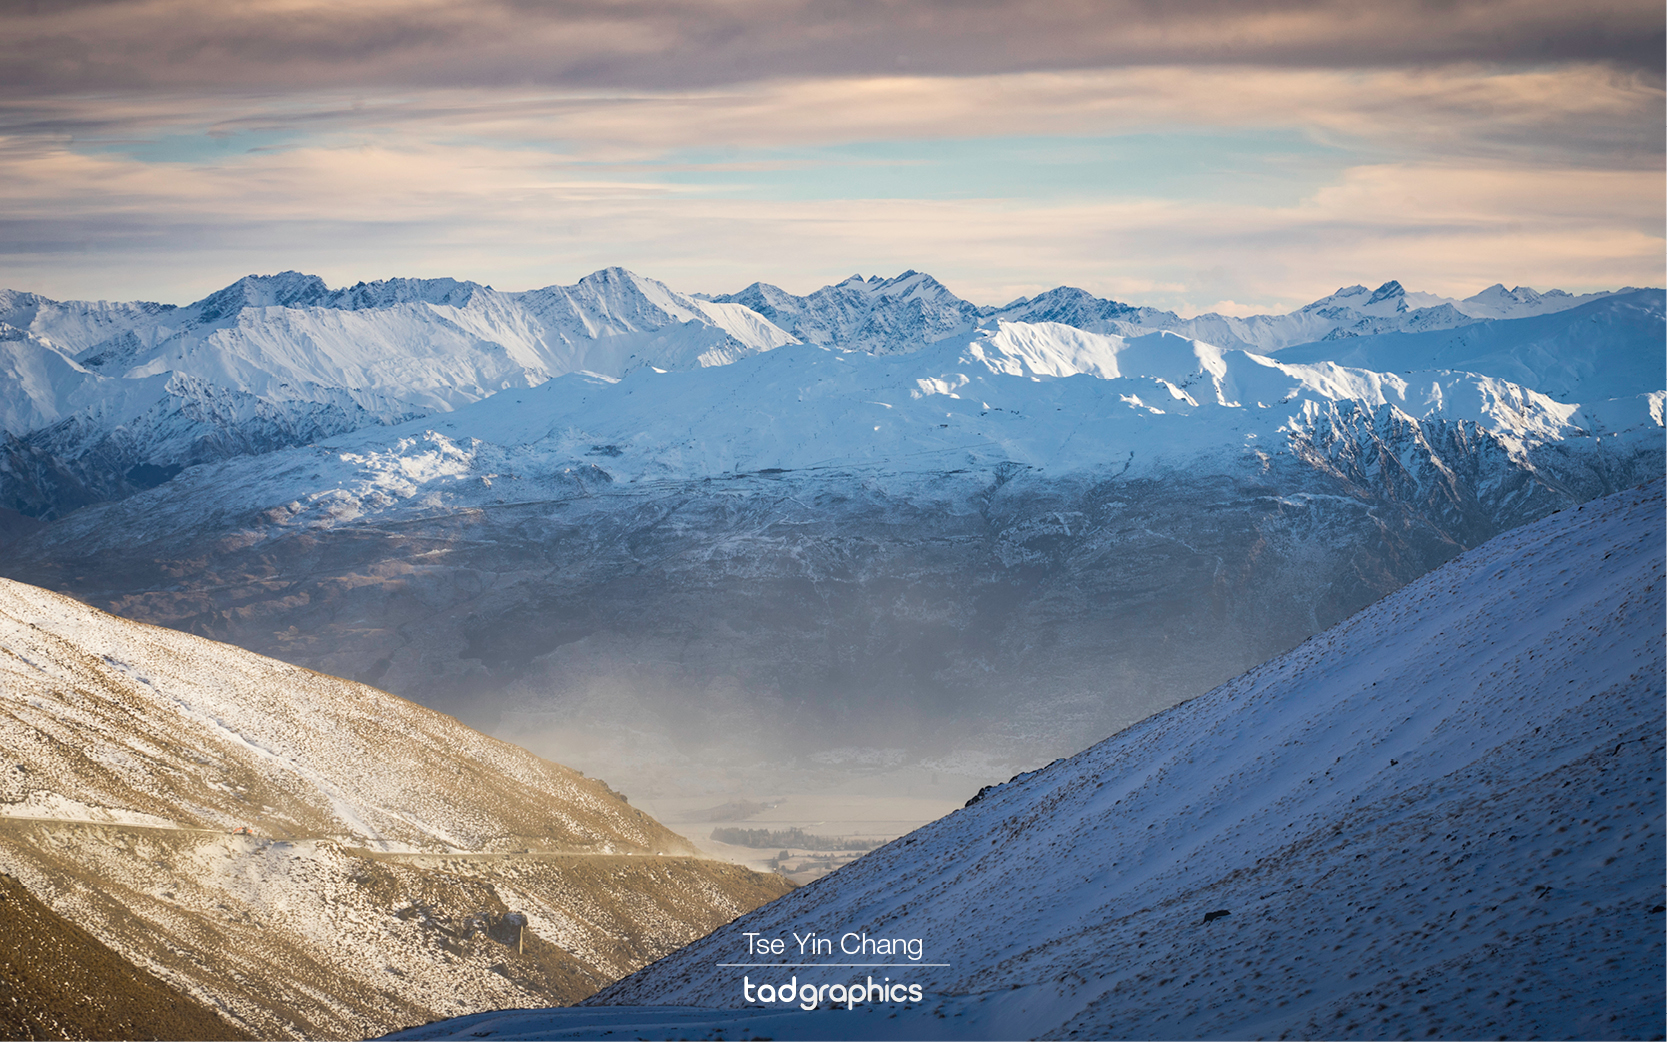 The dramatic mountain range towers over Queenstown, taken from the Remarkables at sunrise